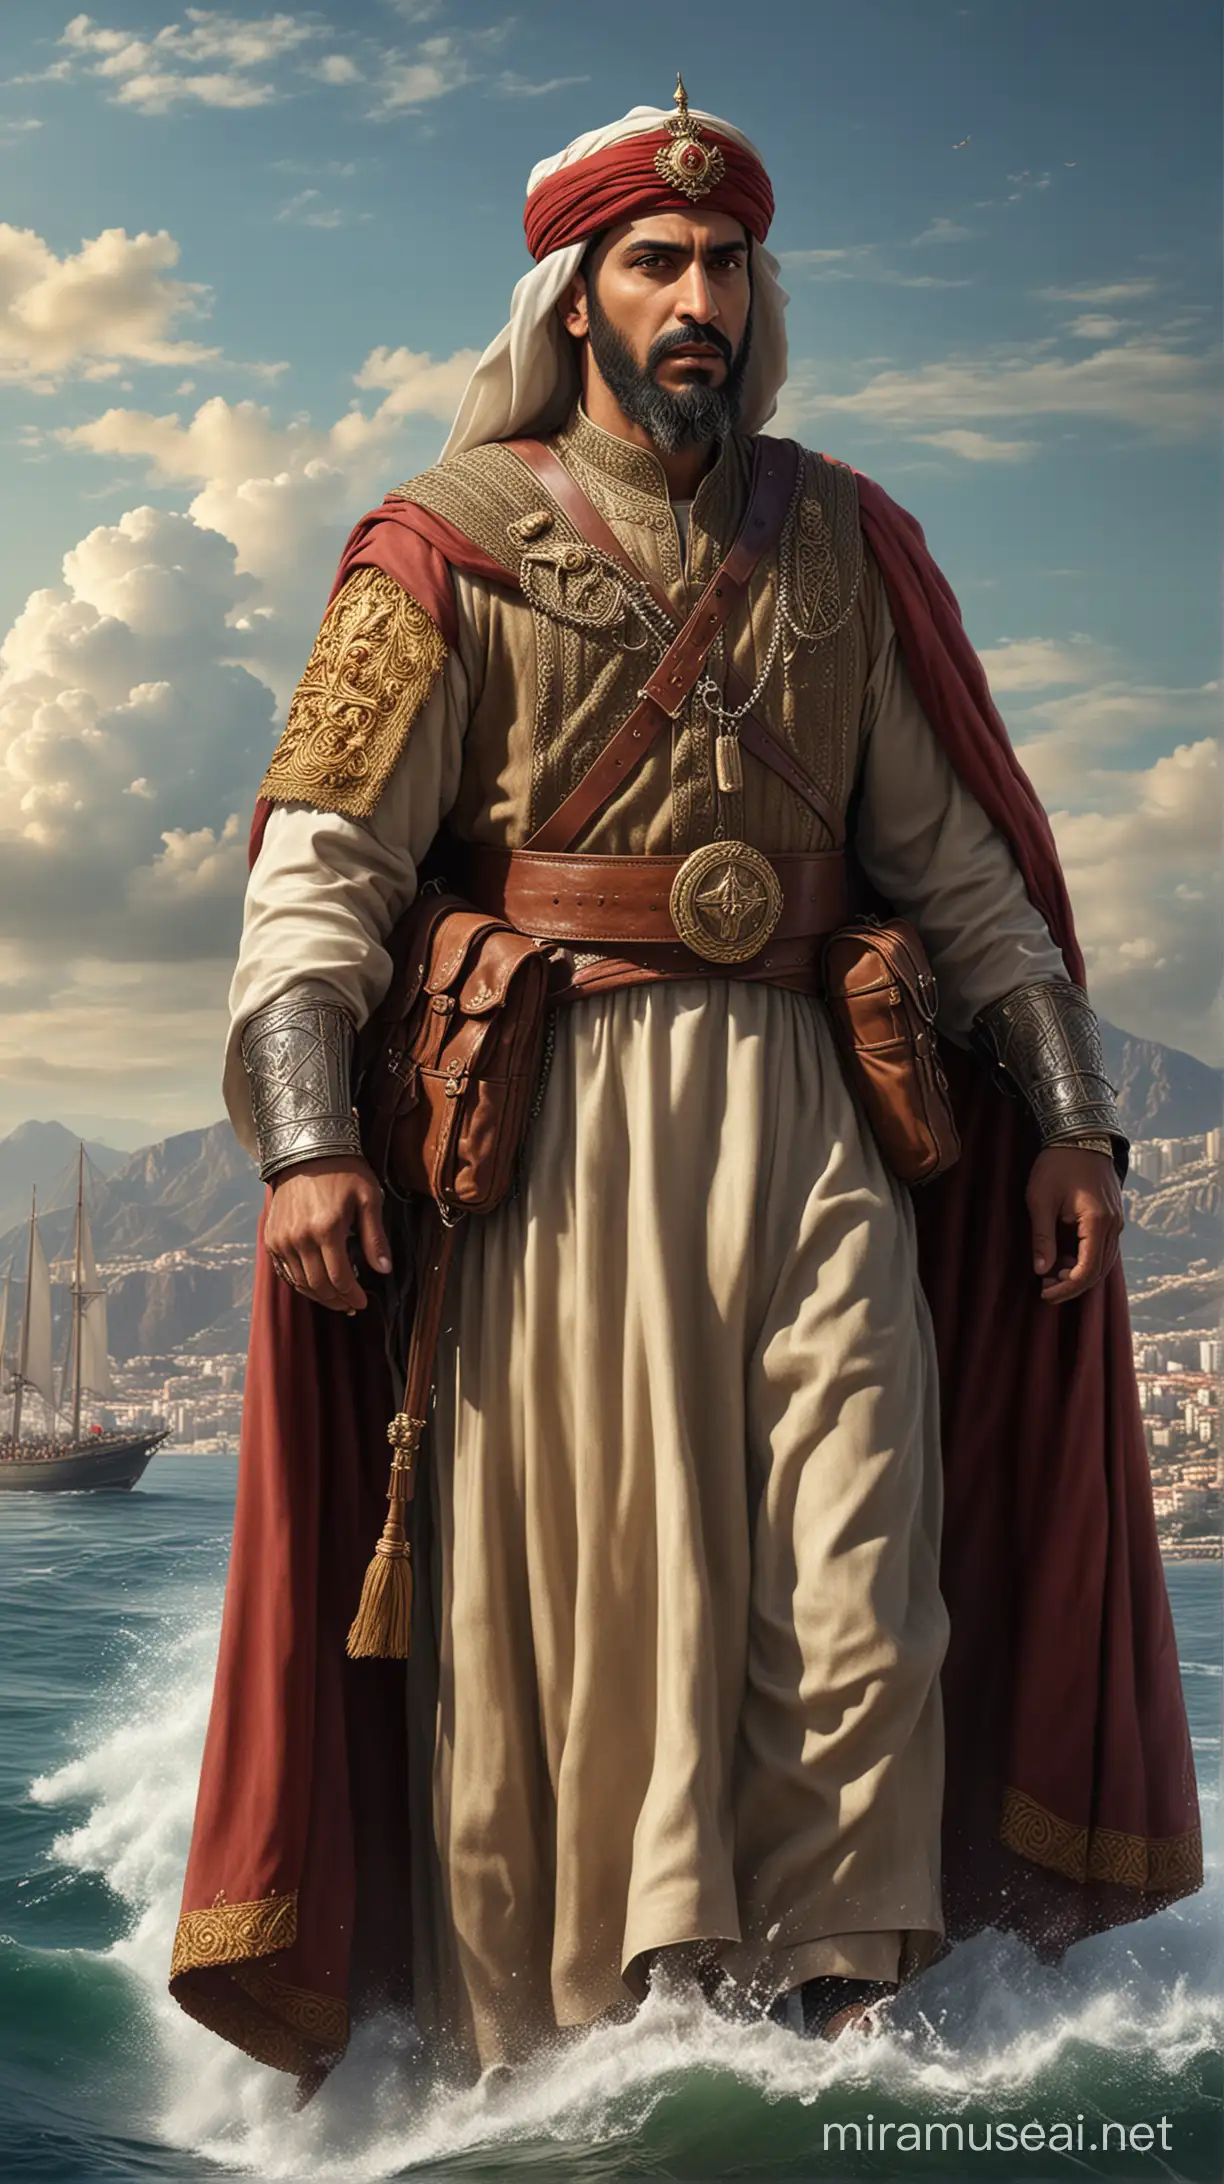 Tariq bin Ziyad, the Muslim general, crossing the Strait of Gibraltar to conquer Spain. Hyper realistic